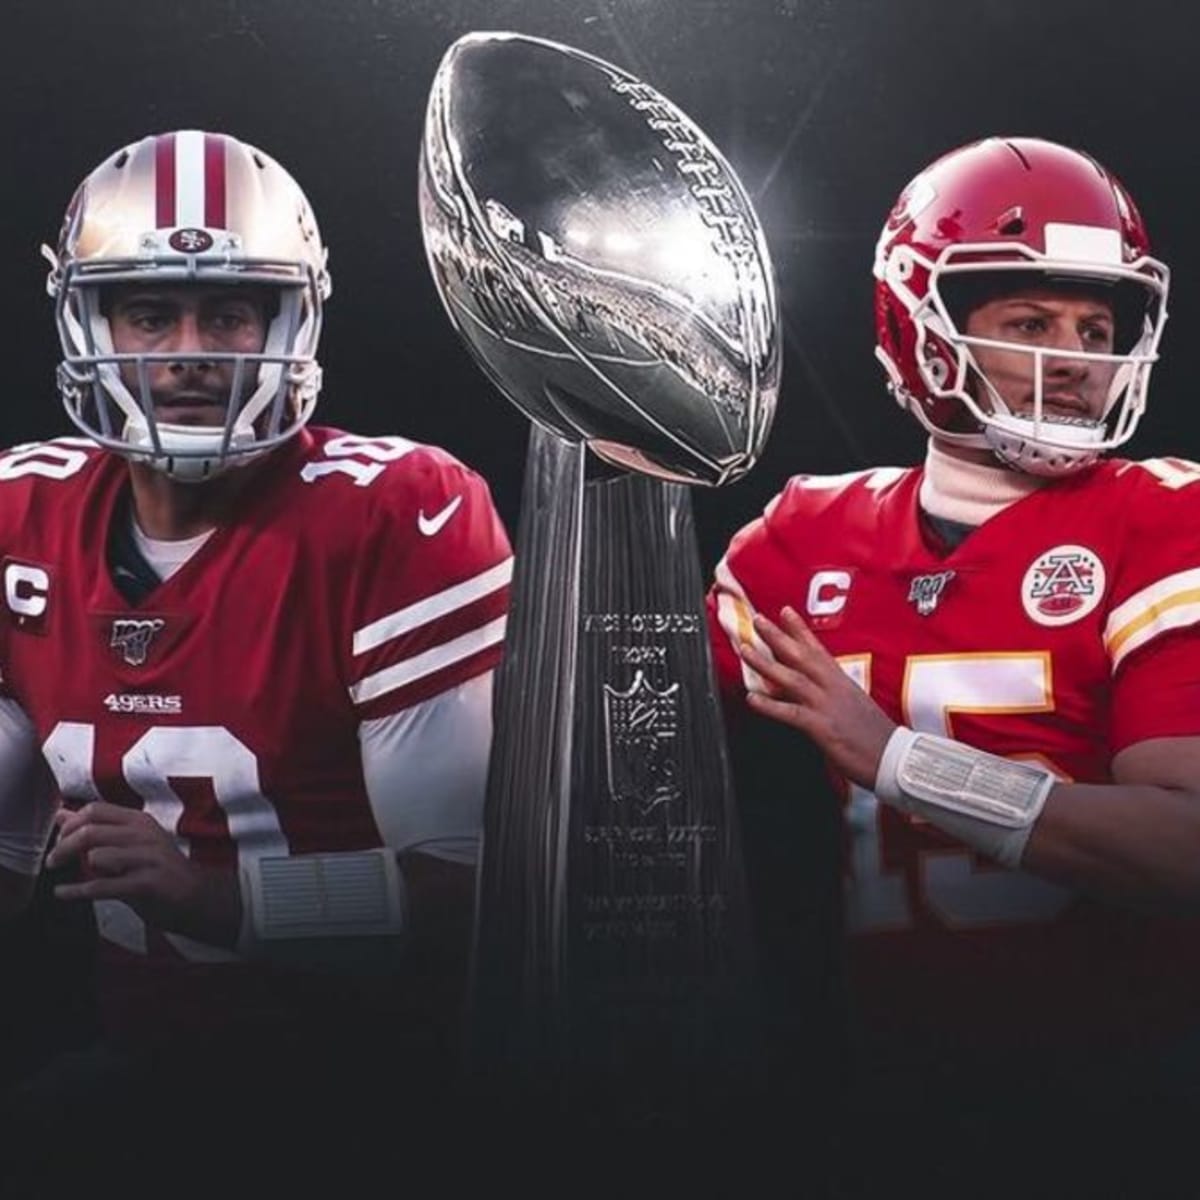 The Super Bowl history of the Chiefs and 49ers, at a glance